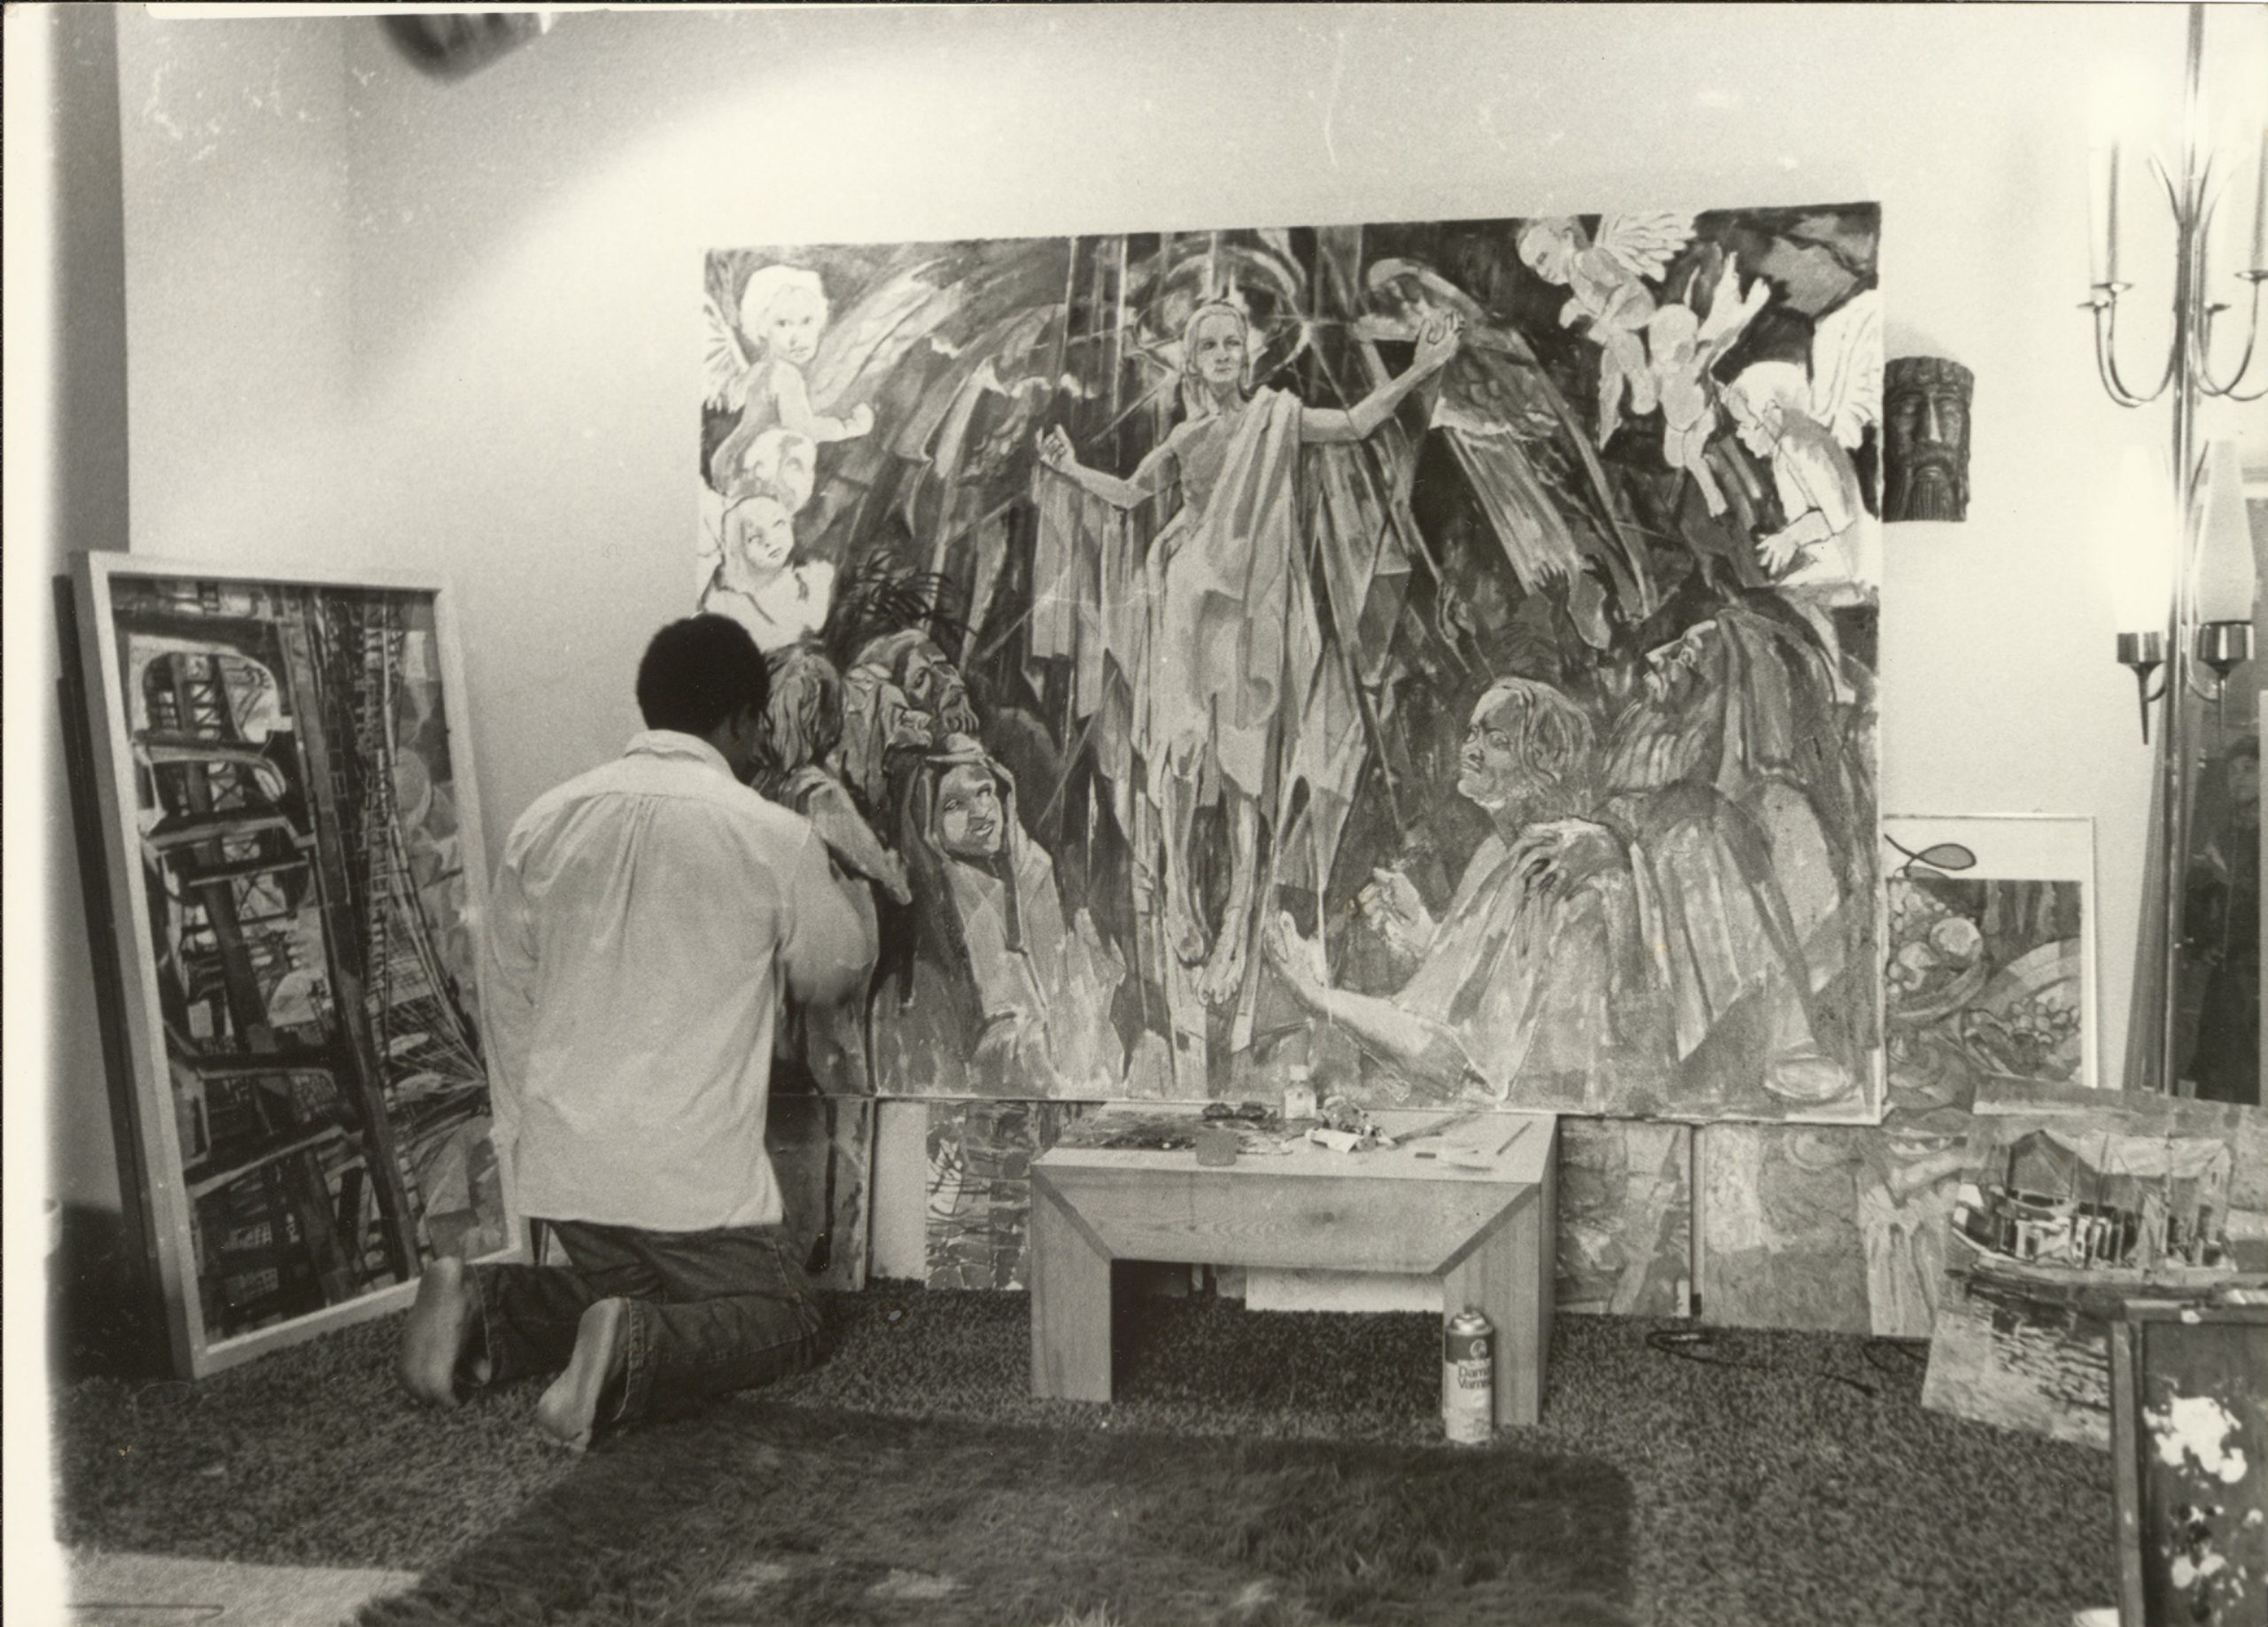 Loper working on painting, n.d.